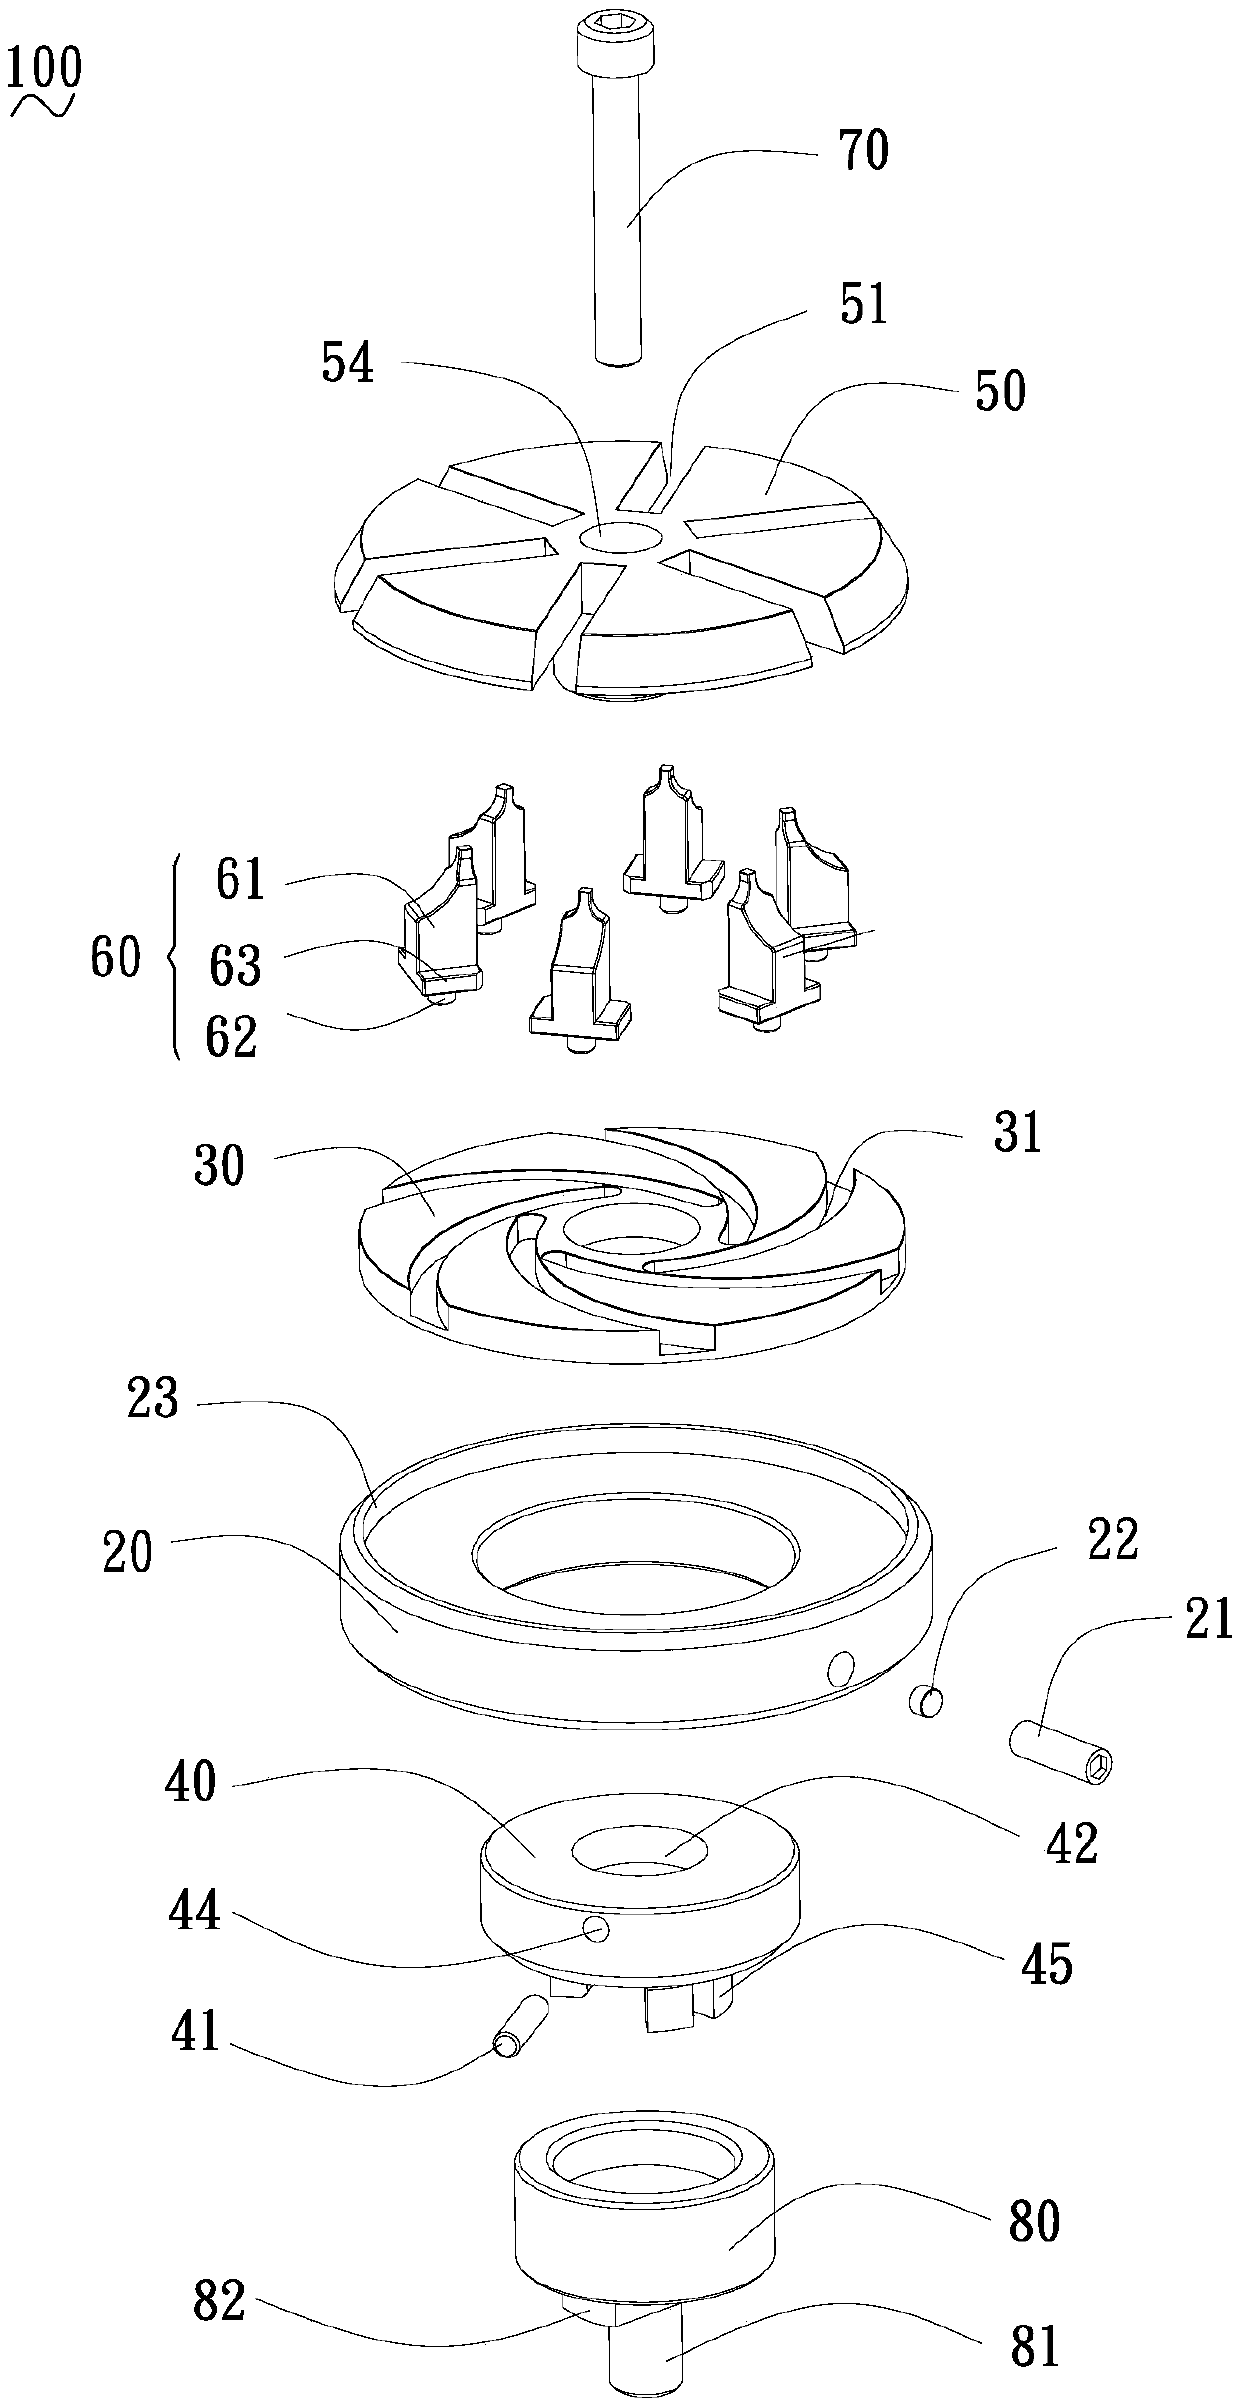 Clamping jaw device